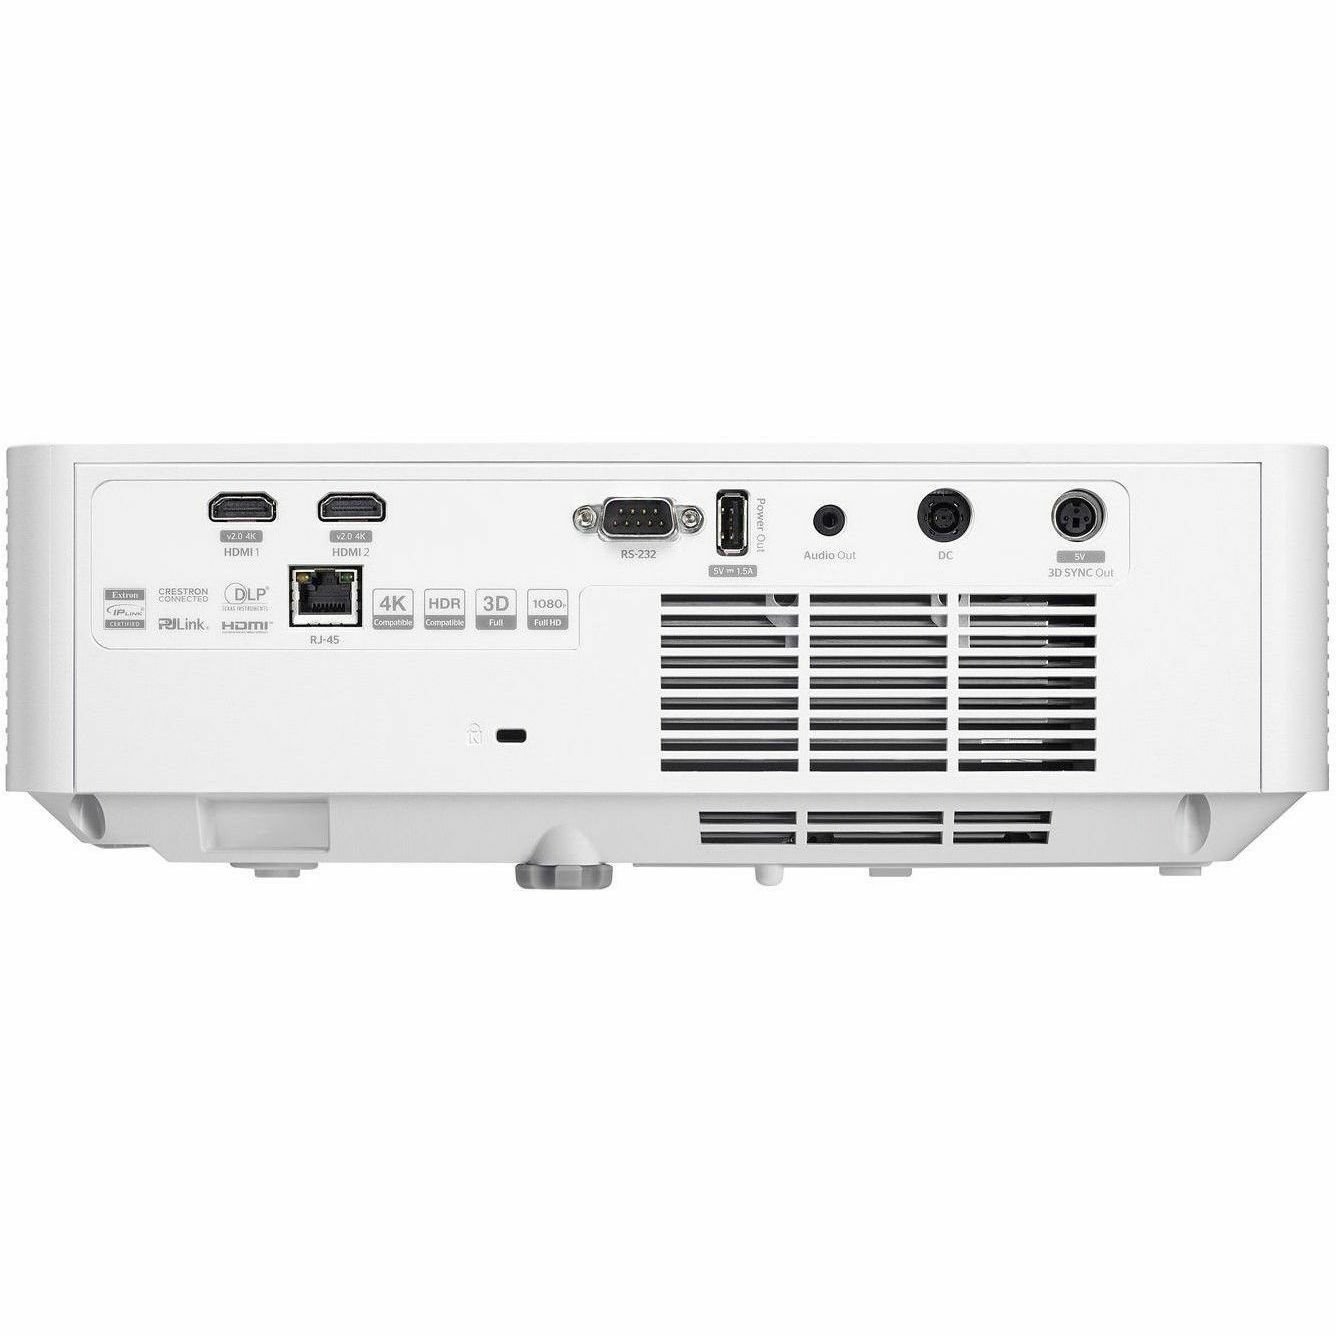 Optoma ZH430UST 3D Ultra Short Throw DLP Projector - 16:9 - White